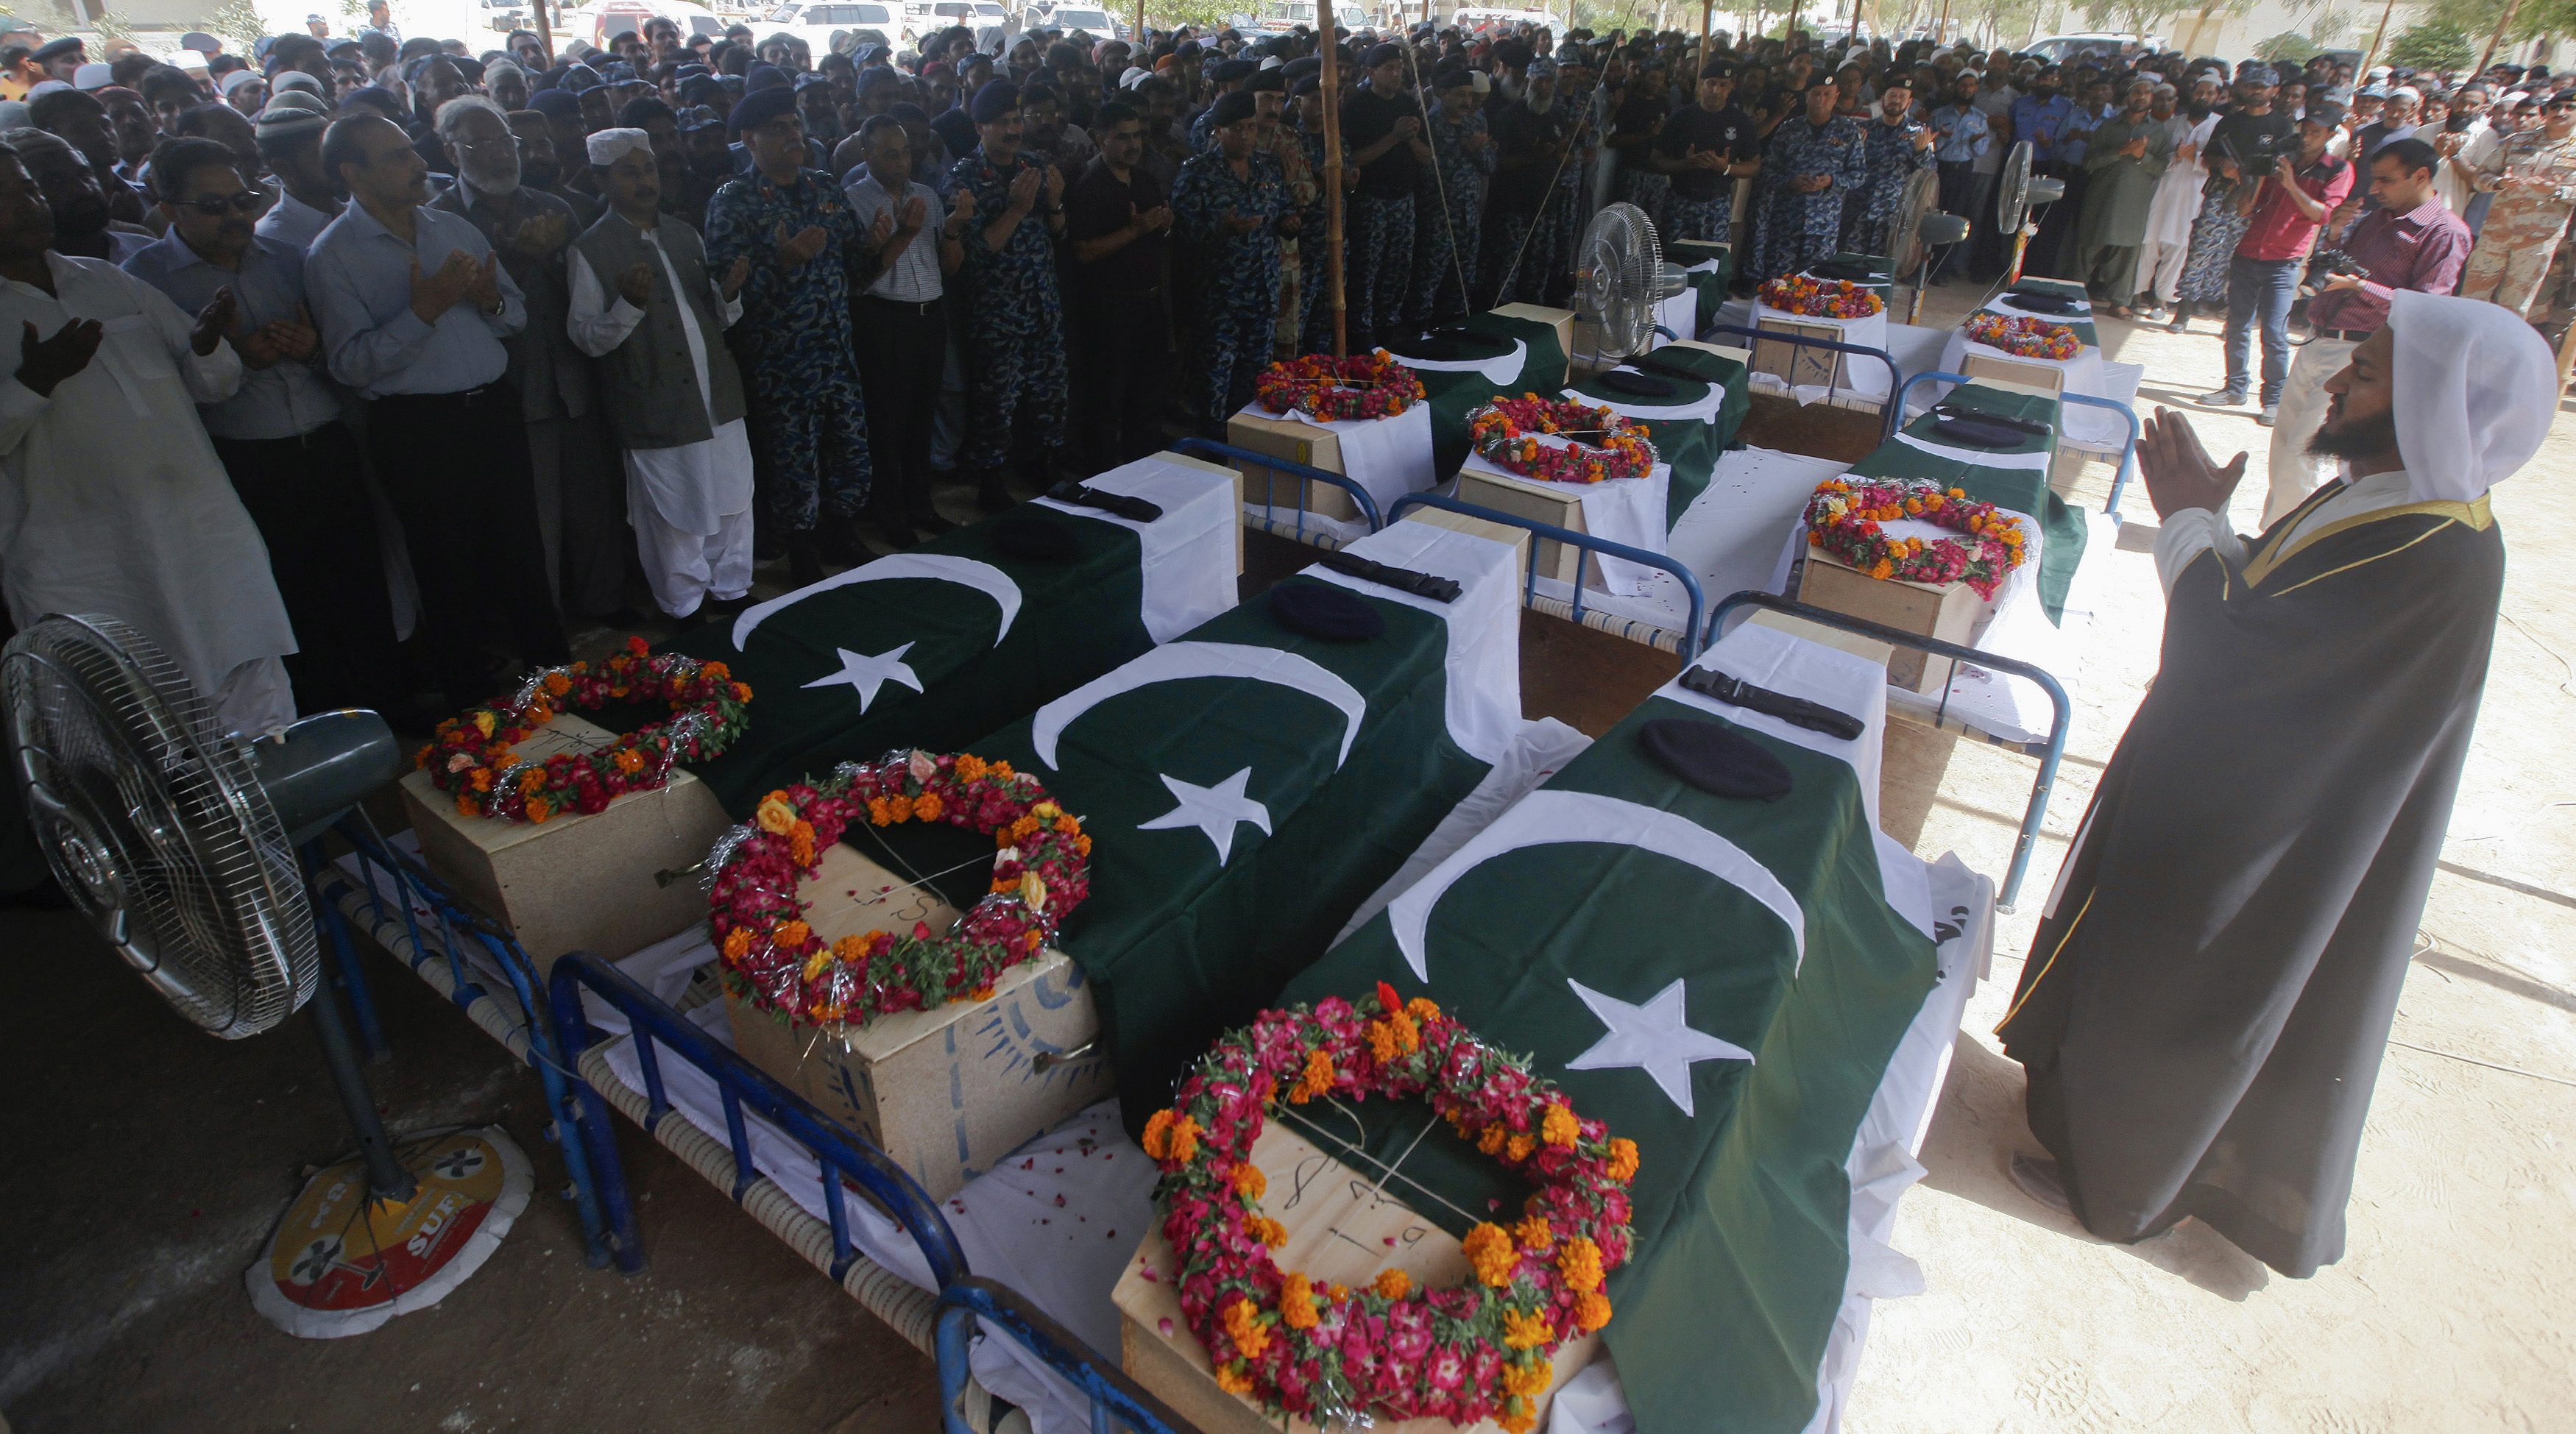 Relatives and colleagues of Airport Security Force soldiers killed on Sunday's Taliban attack on Jinnah International Airport, offer funeral prayers on June 9. Militant fighters stormed the airport disguised as security forces. REUTERS/Athar Hussain